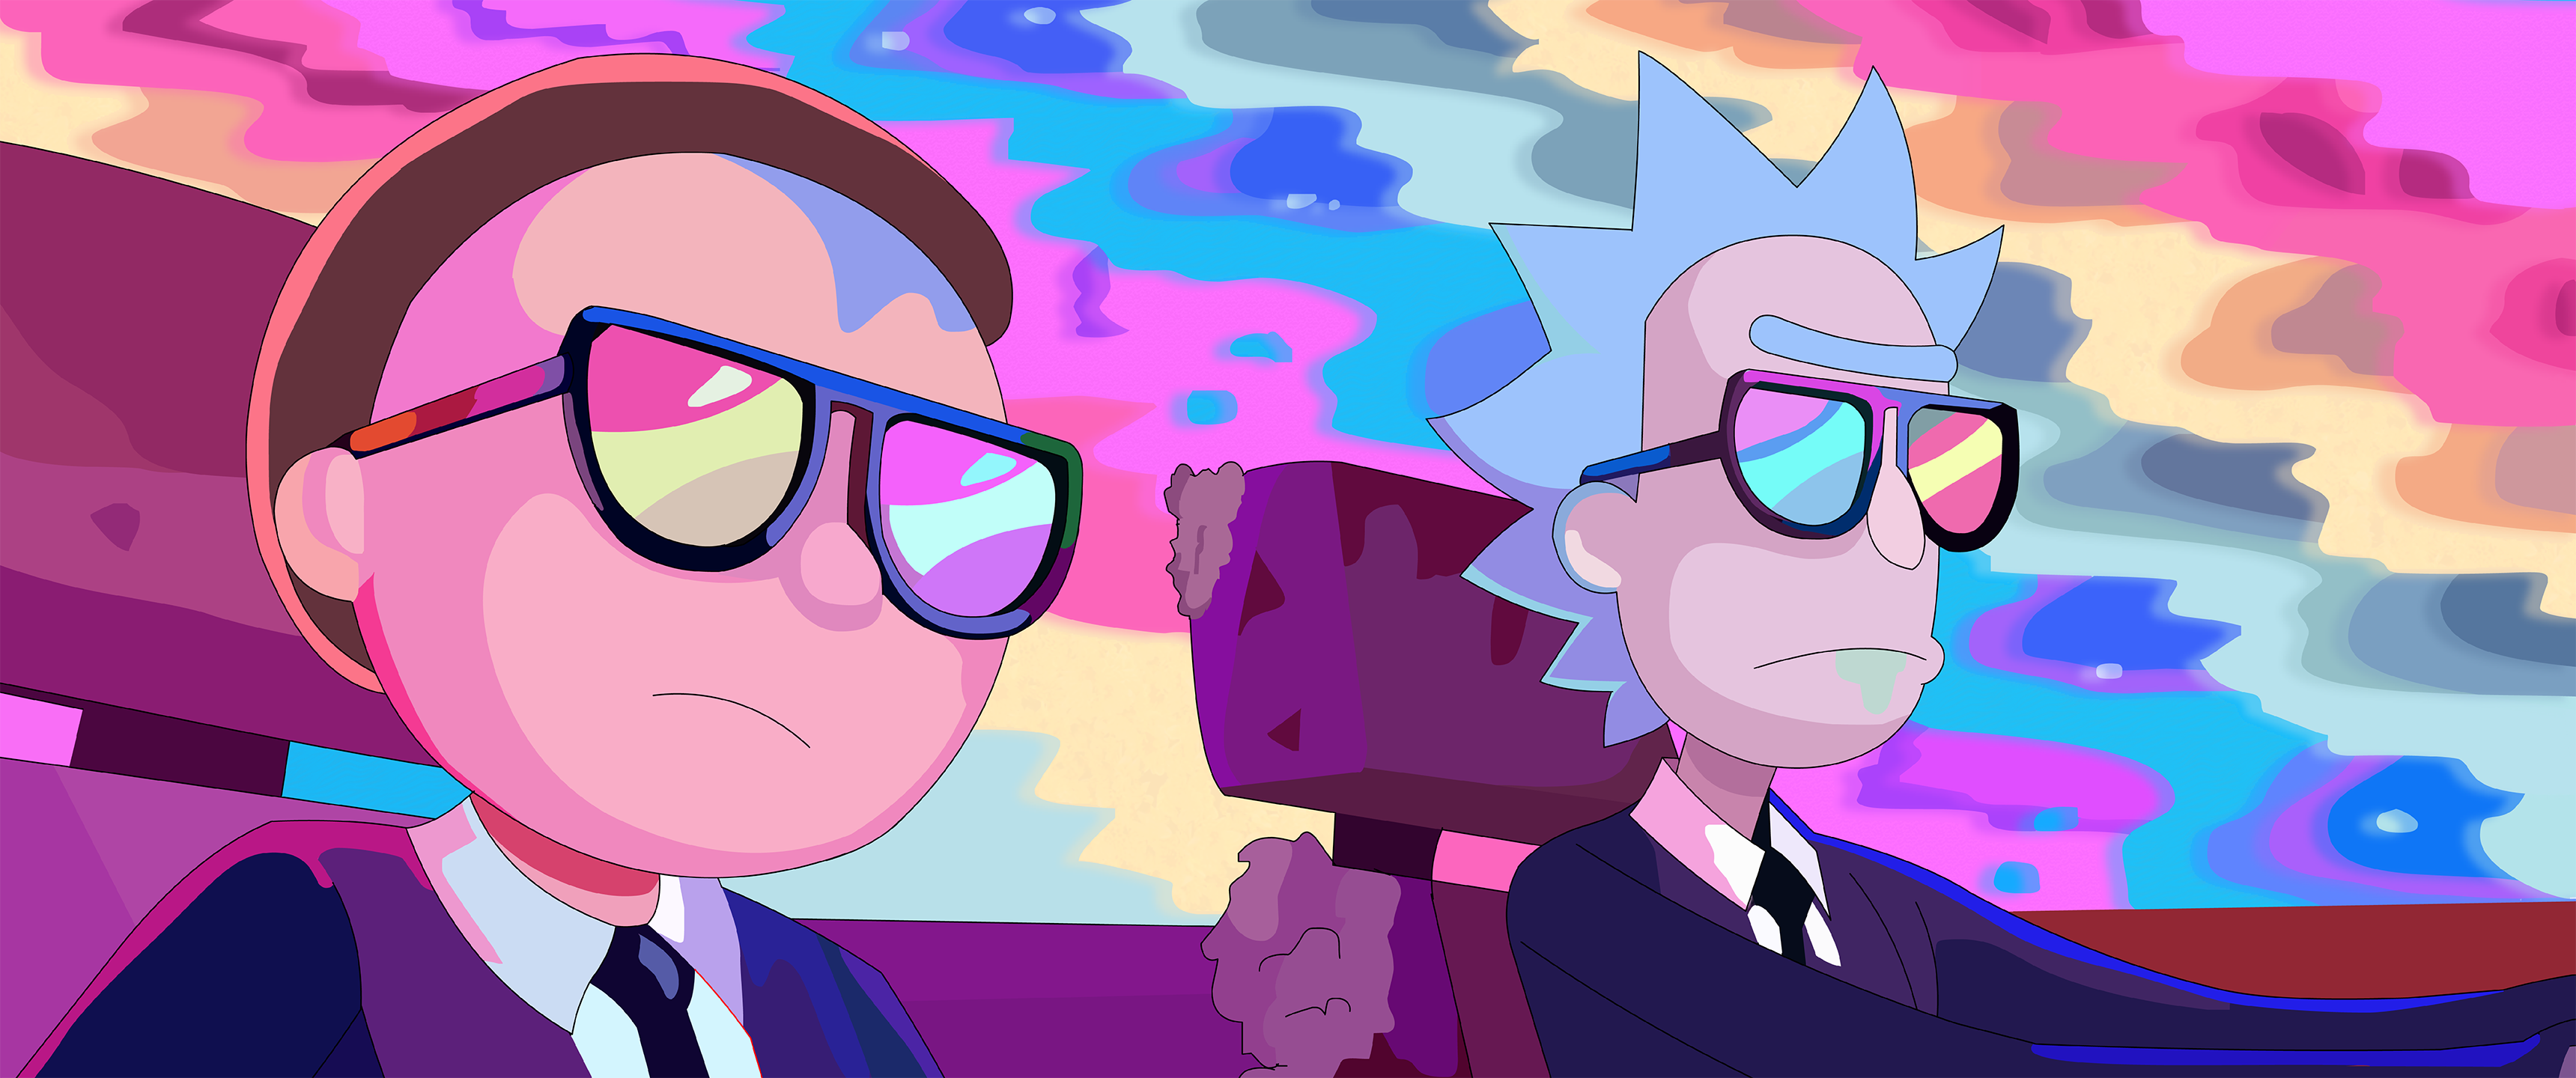 General 3440x1440 Rick and Morty Run the Jewels vector cartoon